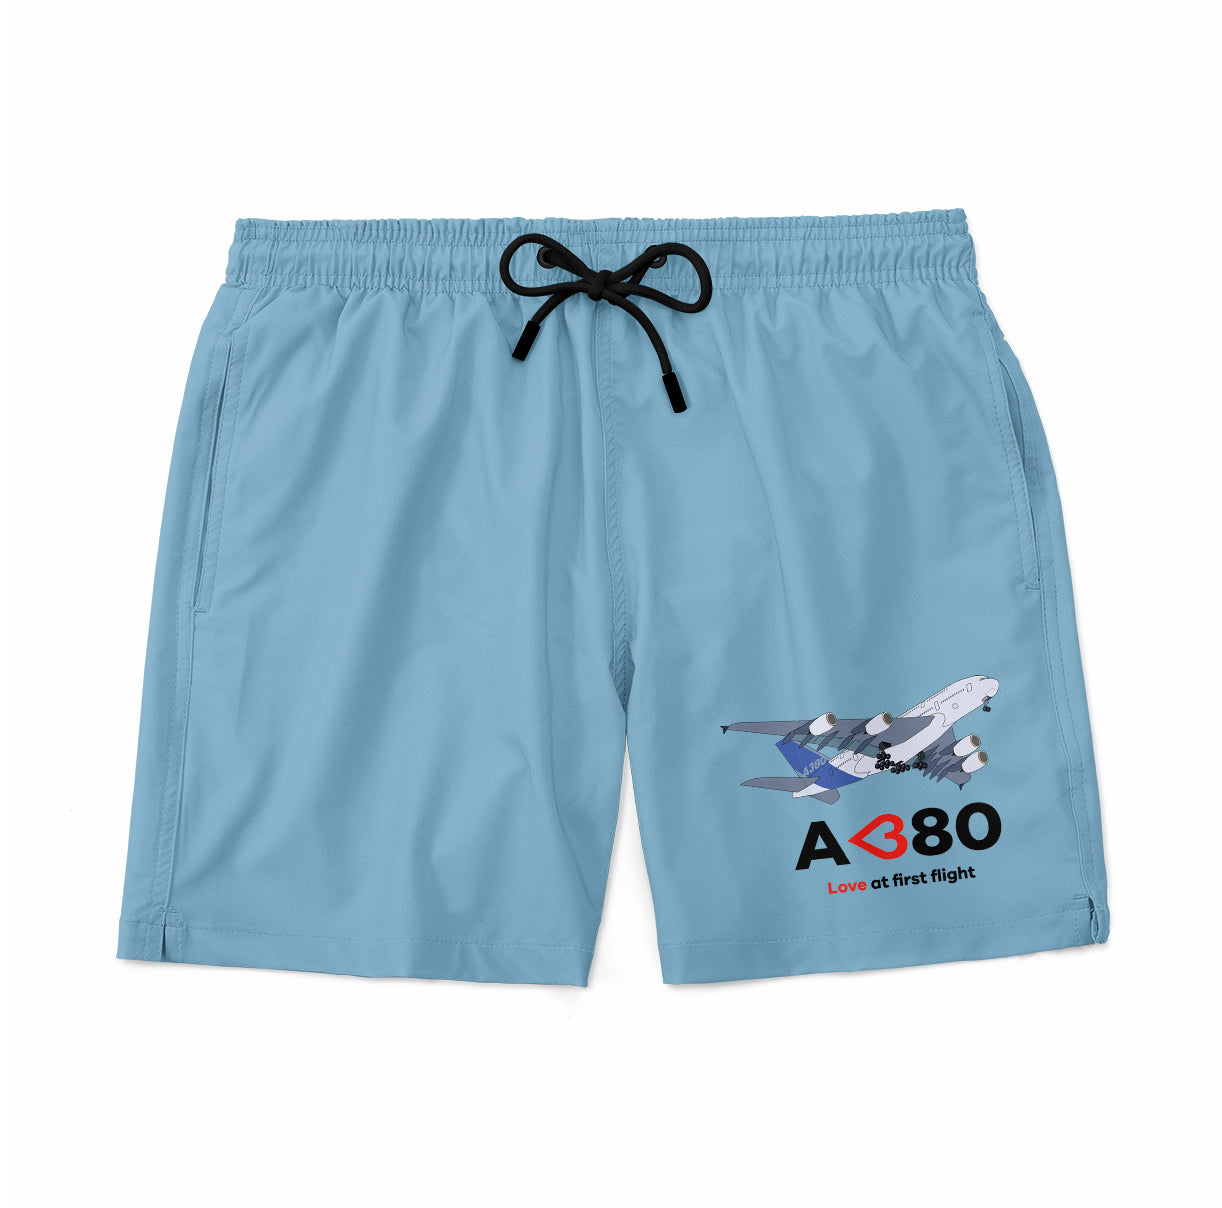 Airbus A380 Love at first flight Designed Swim Trunks & Shorts